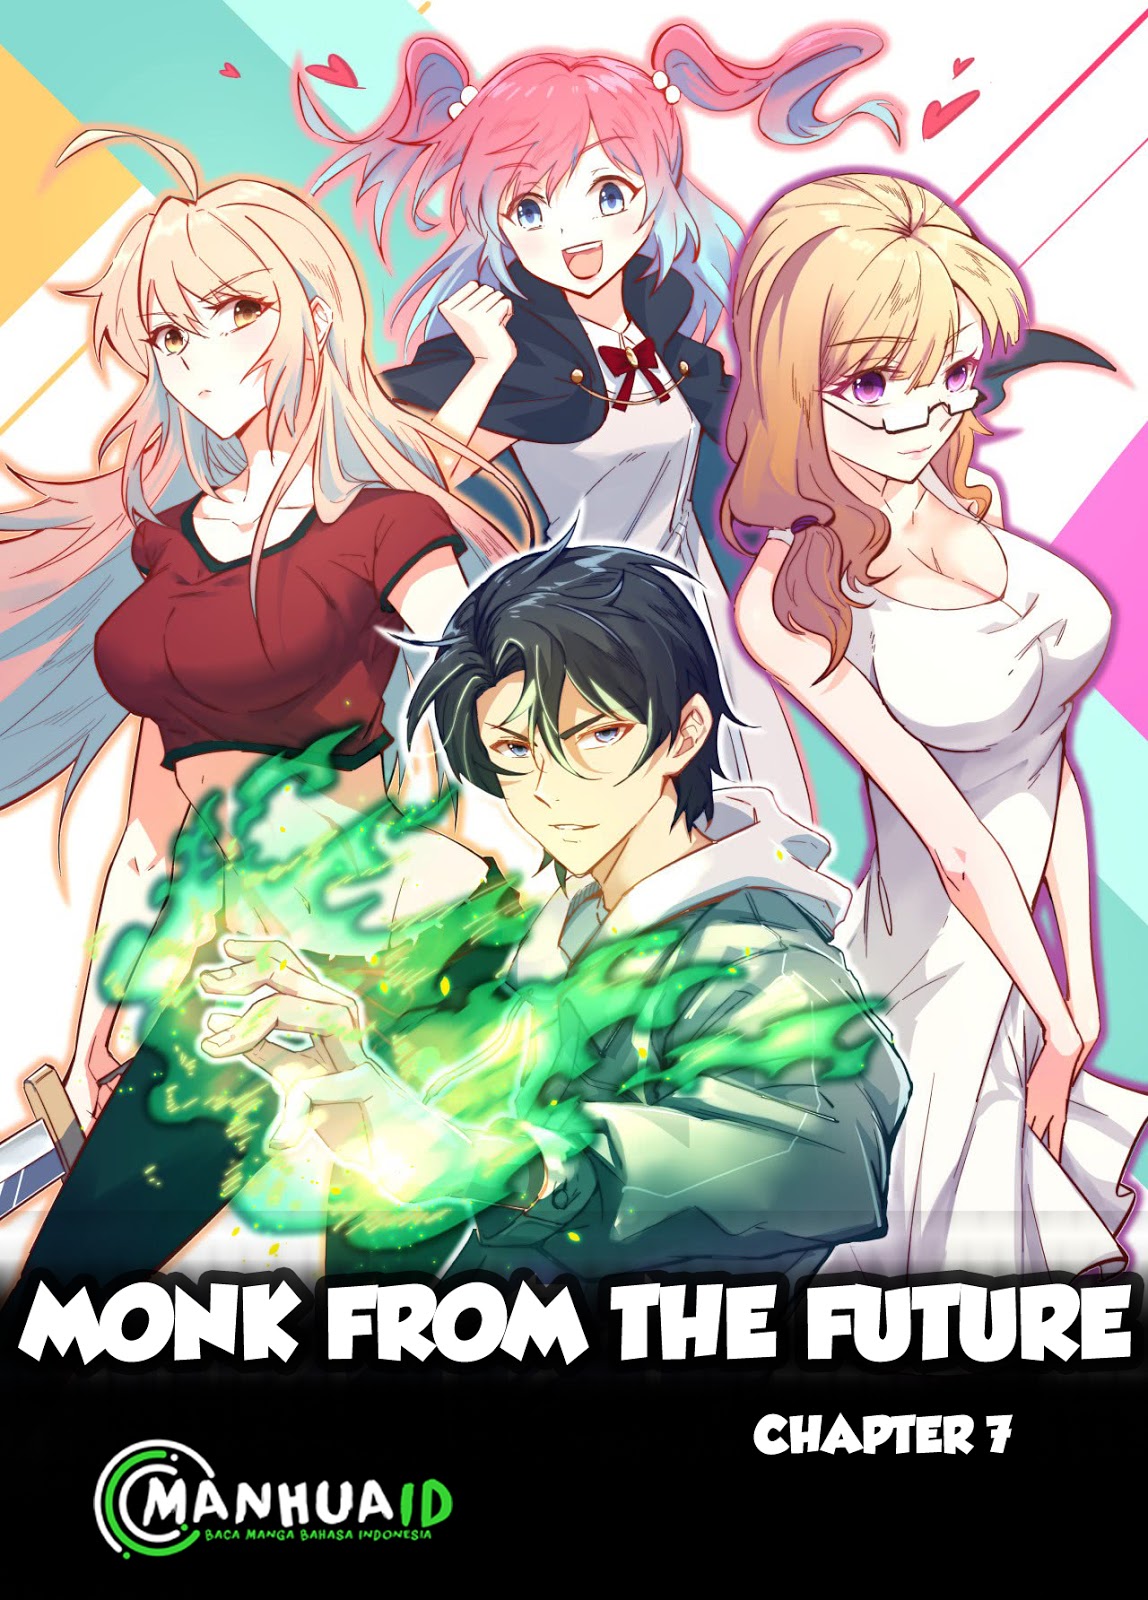 Monk From the Future Chapter 7